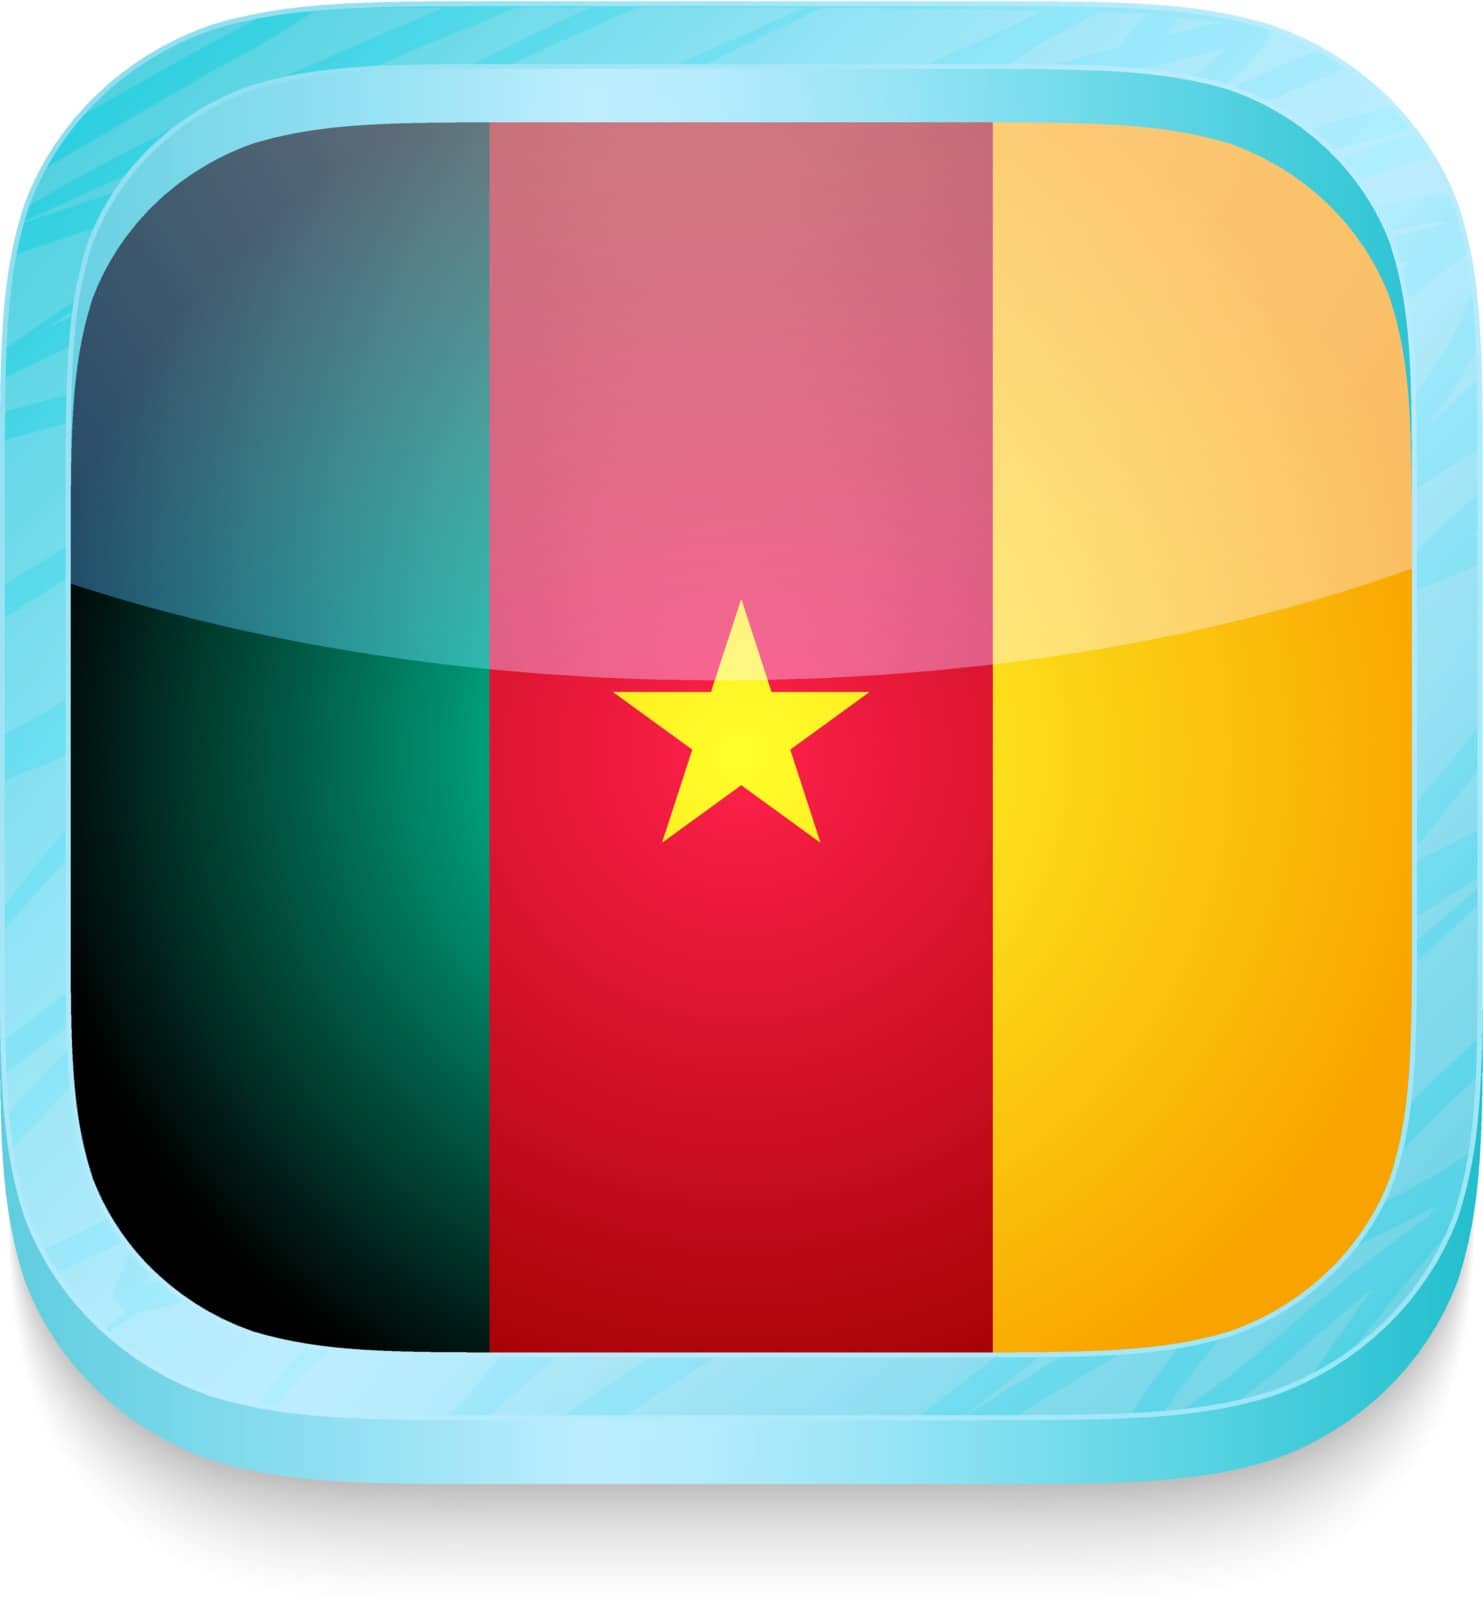 Smart phone button with Cameroon flag by Lirch